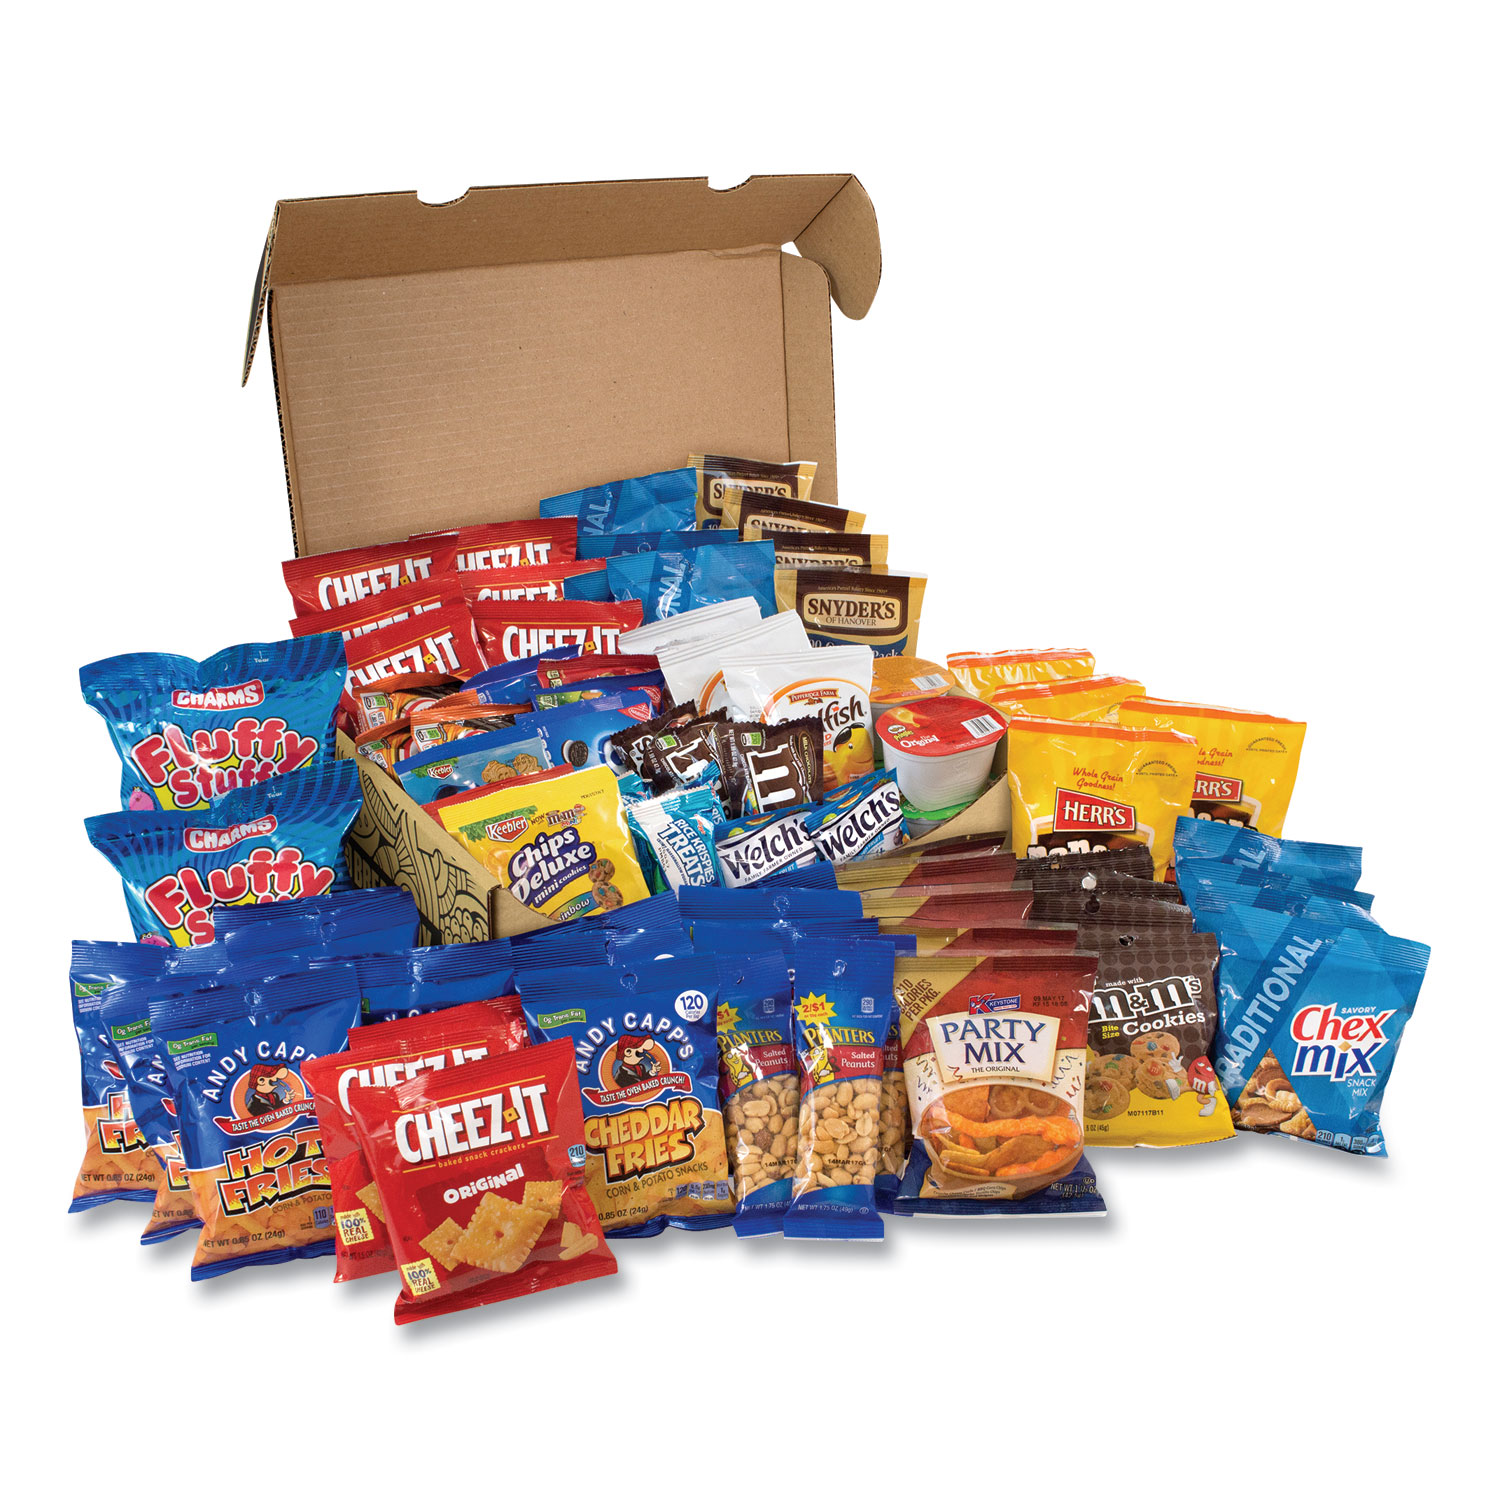  Snack Box Pros 70000026 Big Party Snack Box, 75 Assorted Snacks, Free Delivery in 1-4 Business Days (GRR700S0026) 